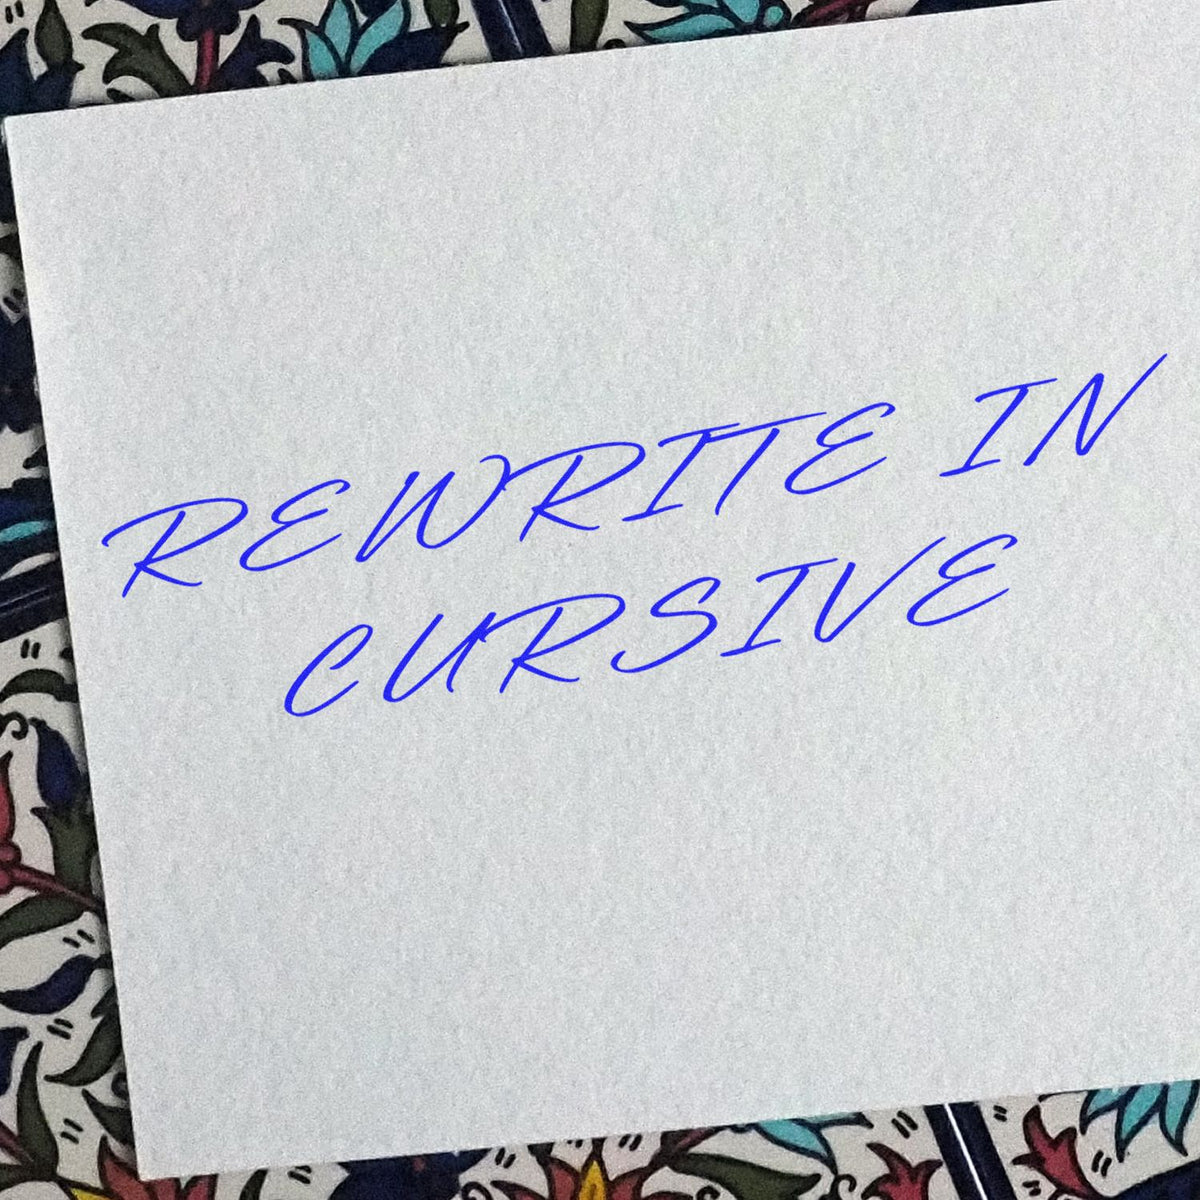 Large Rewrite In Cursive Rubber Stamp In Use Photo